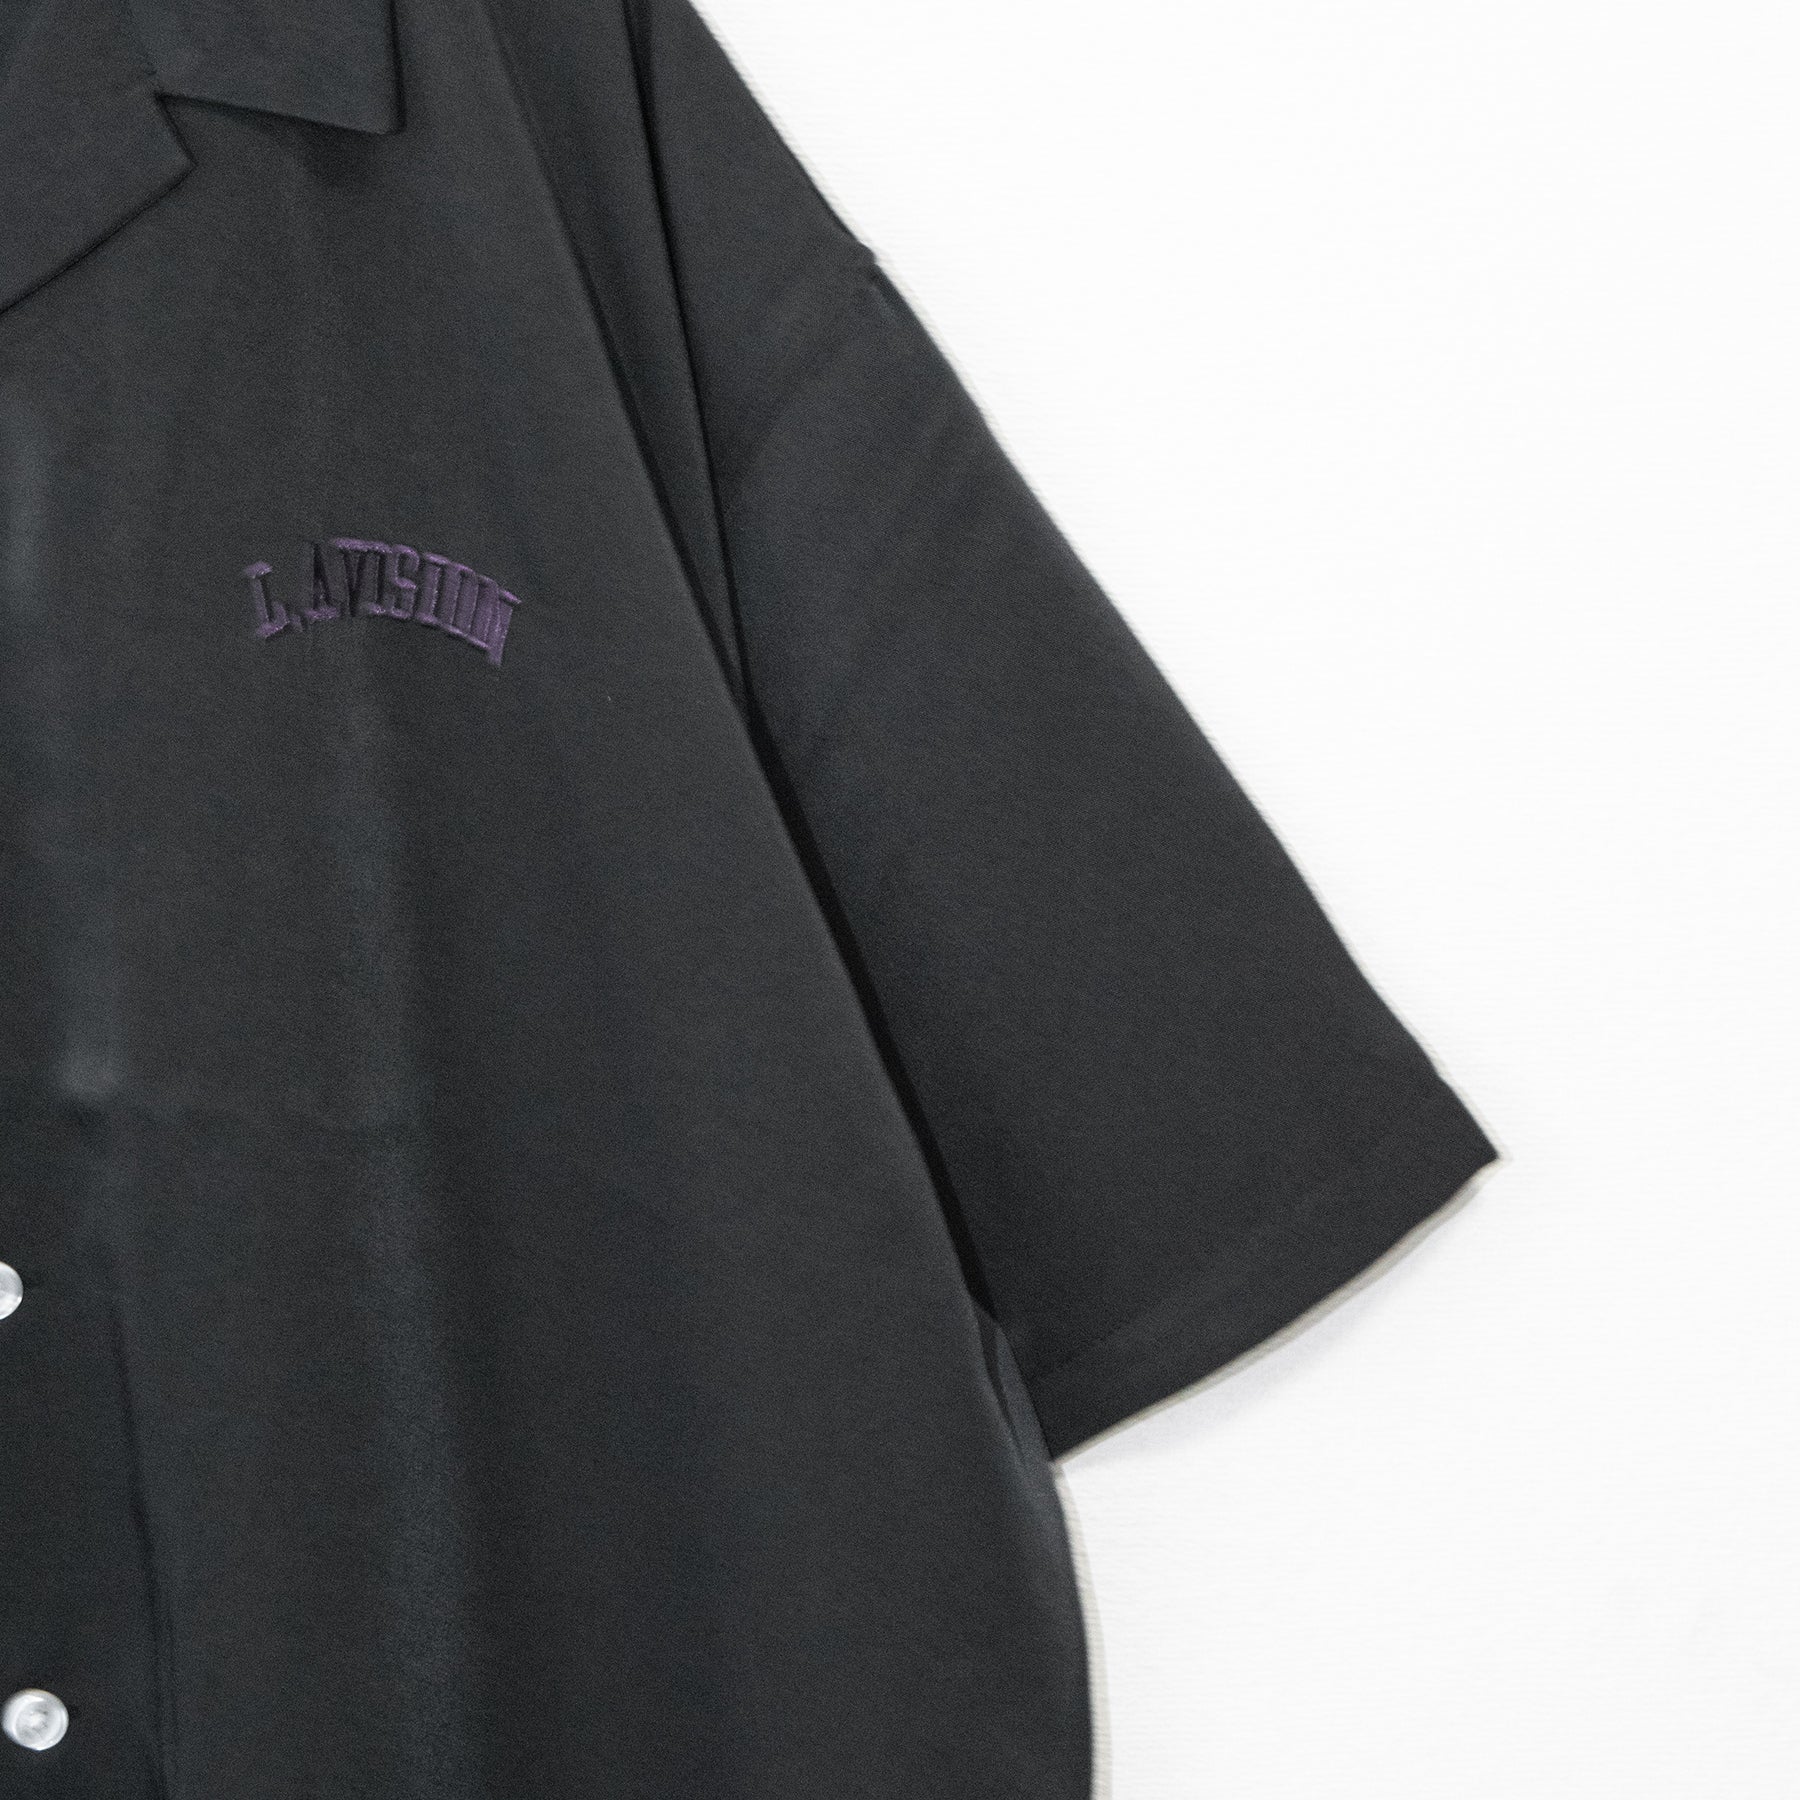 VISION STREET WEAR Satin Patch Open Collar S/S Shirt Black - YOUAREMYPOISON